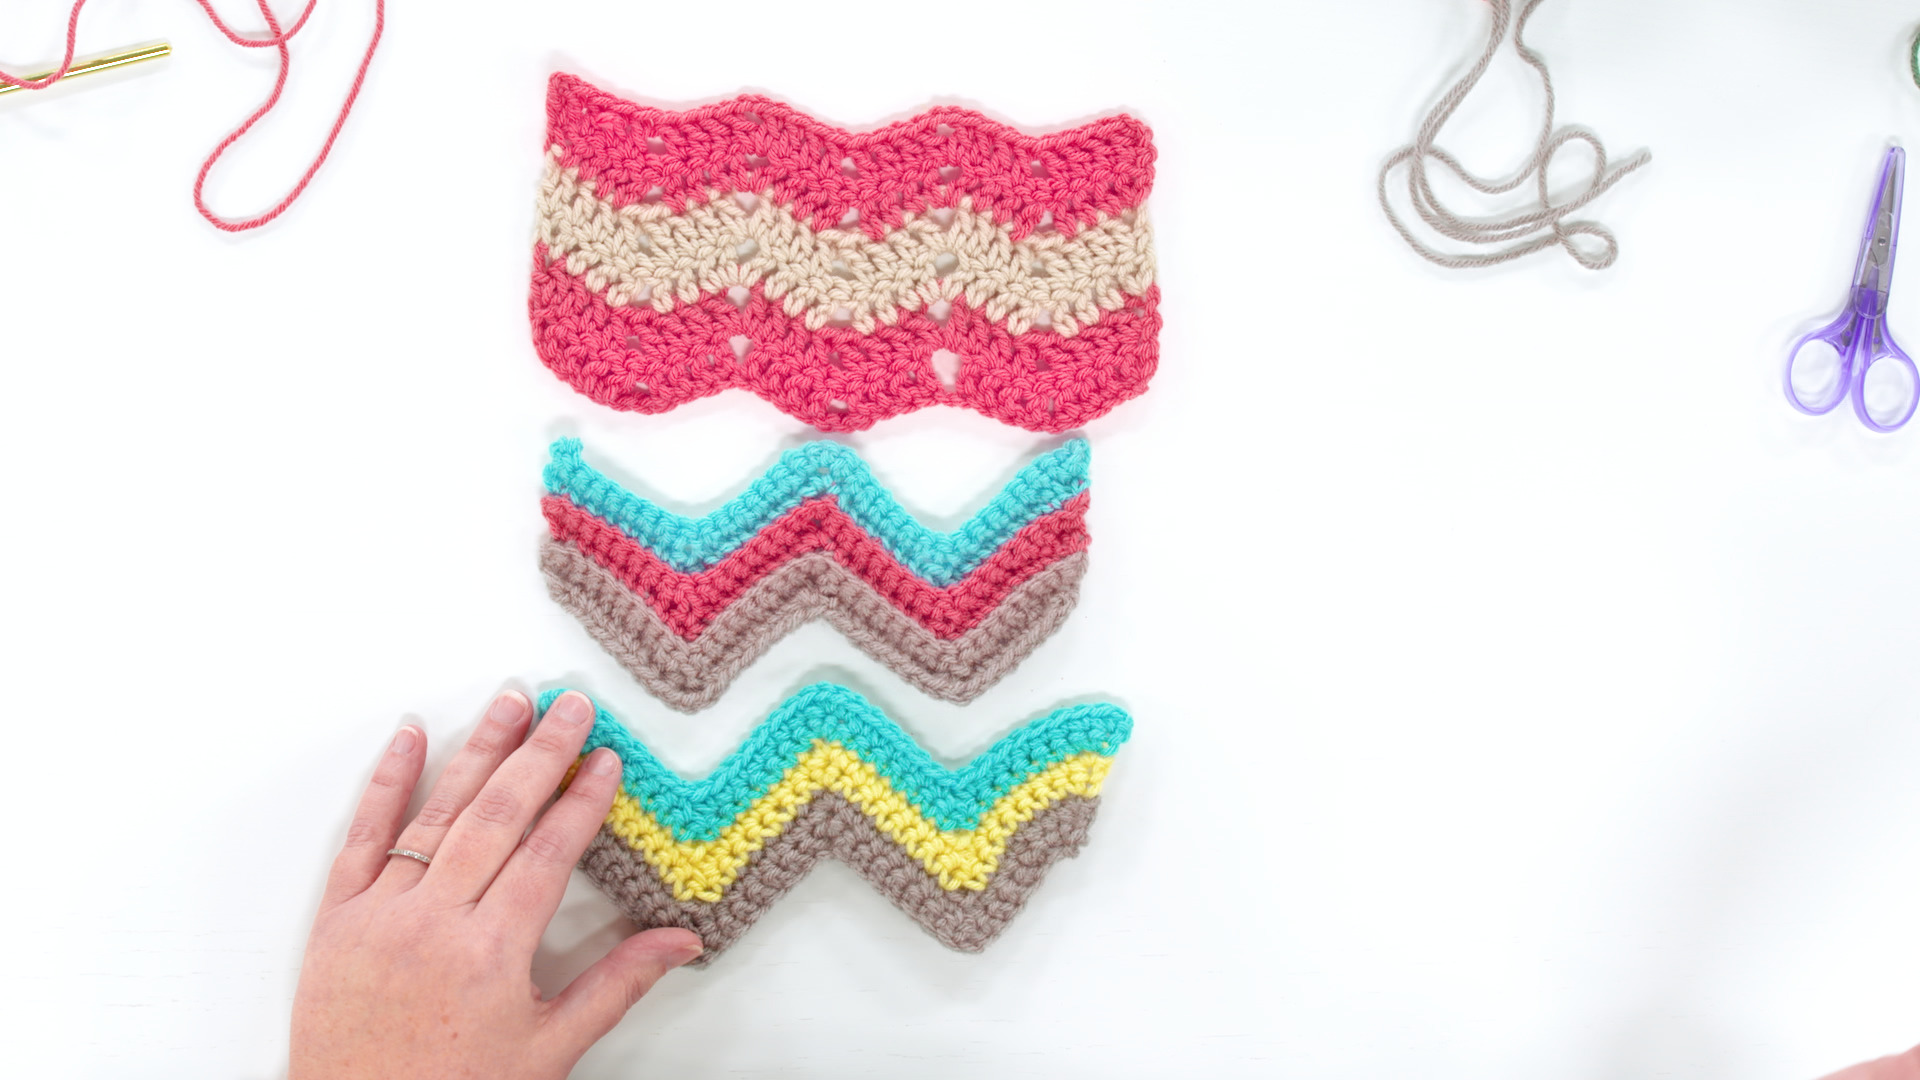 Red Heart Yarns - Combine an simple ripple stitch with the